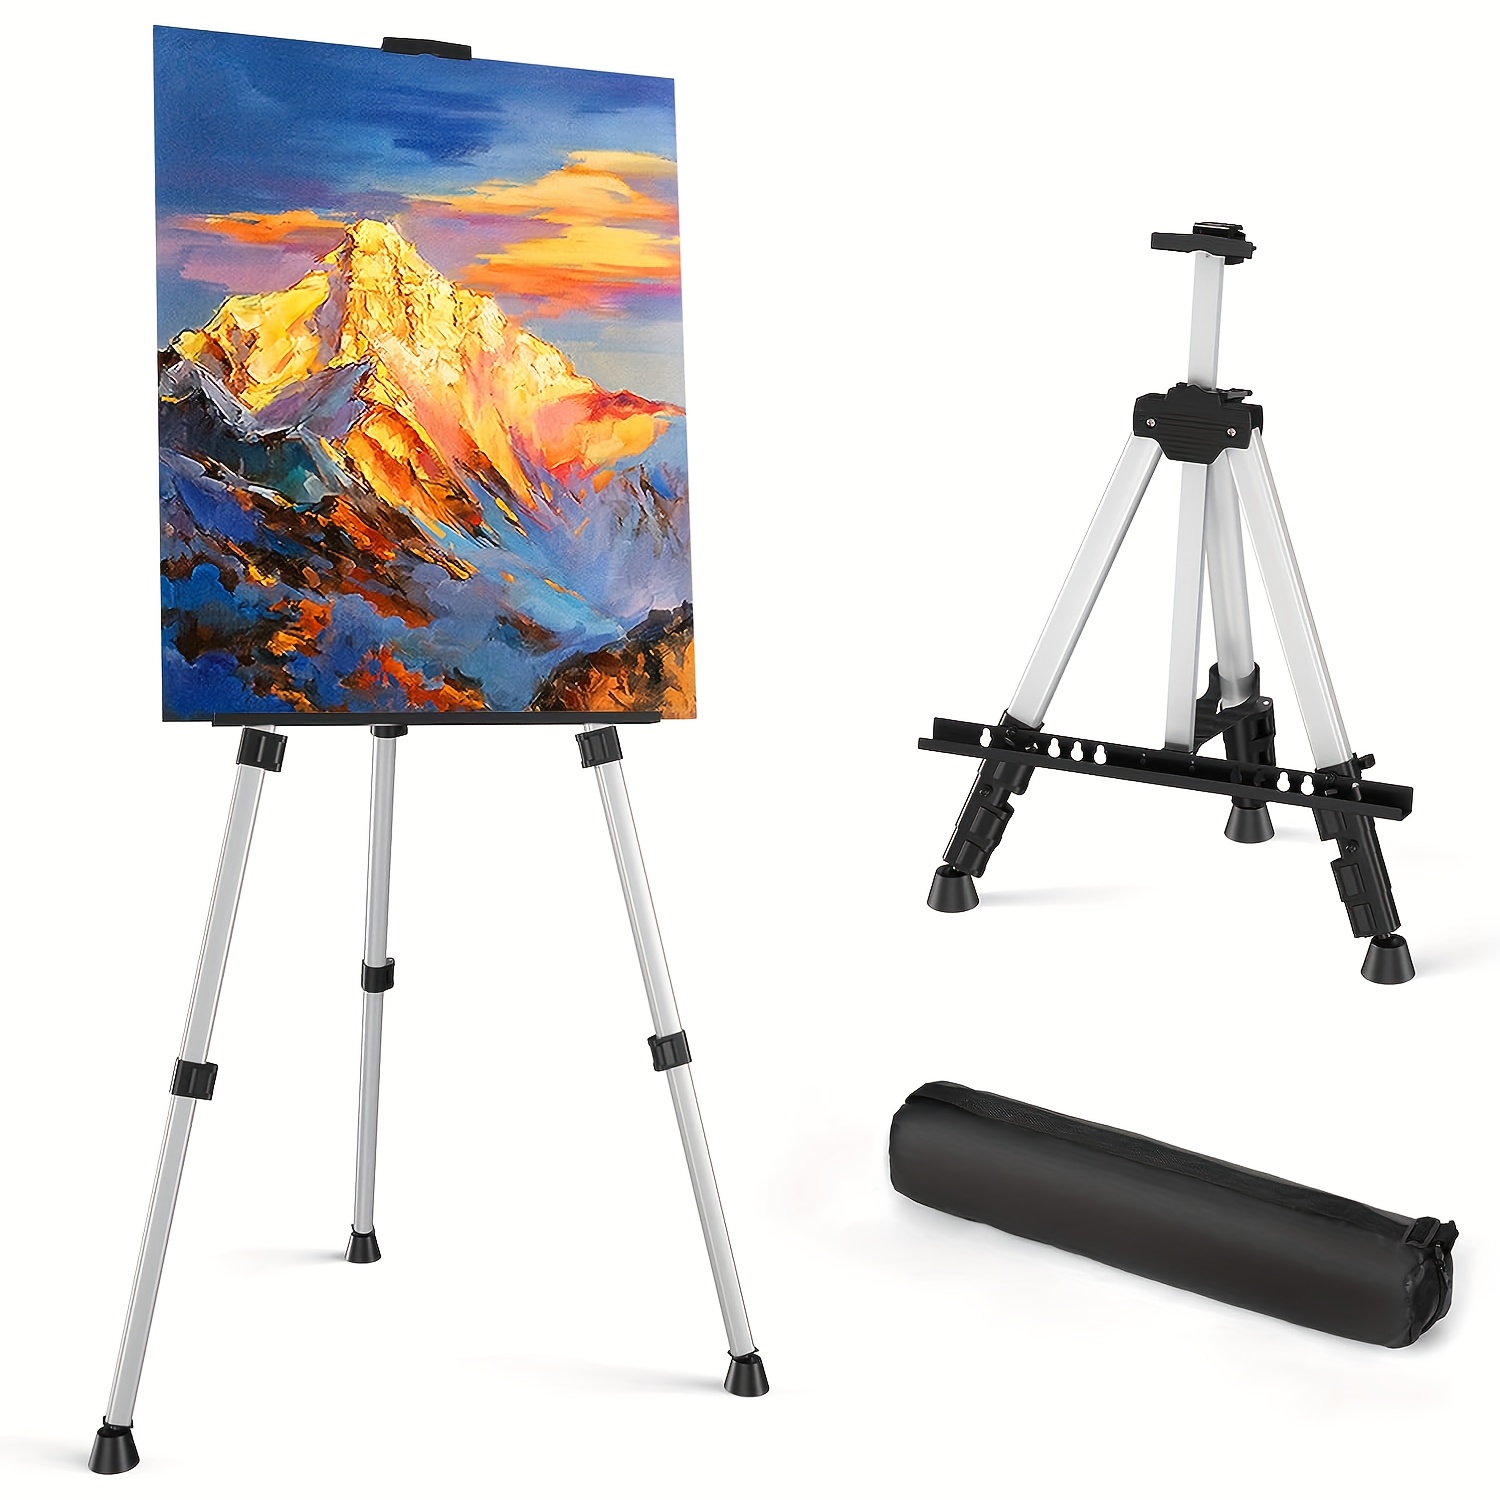 MEEDEN Metal Easel Stand for Painting & Display - 63 Tall Adjustable  Instant Folding Tripod Easels with Bag for Wedding Signs, Presentations,  Canvas